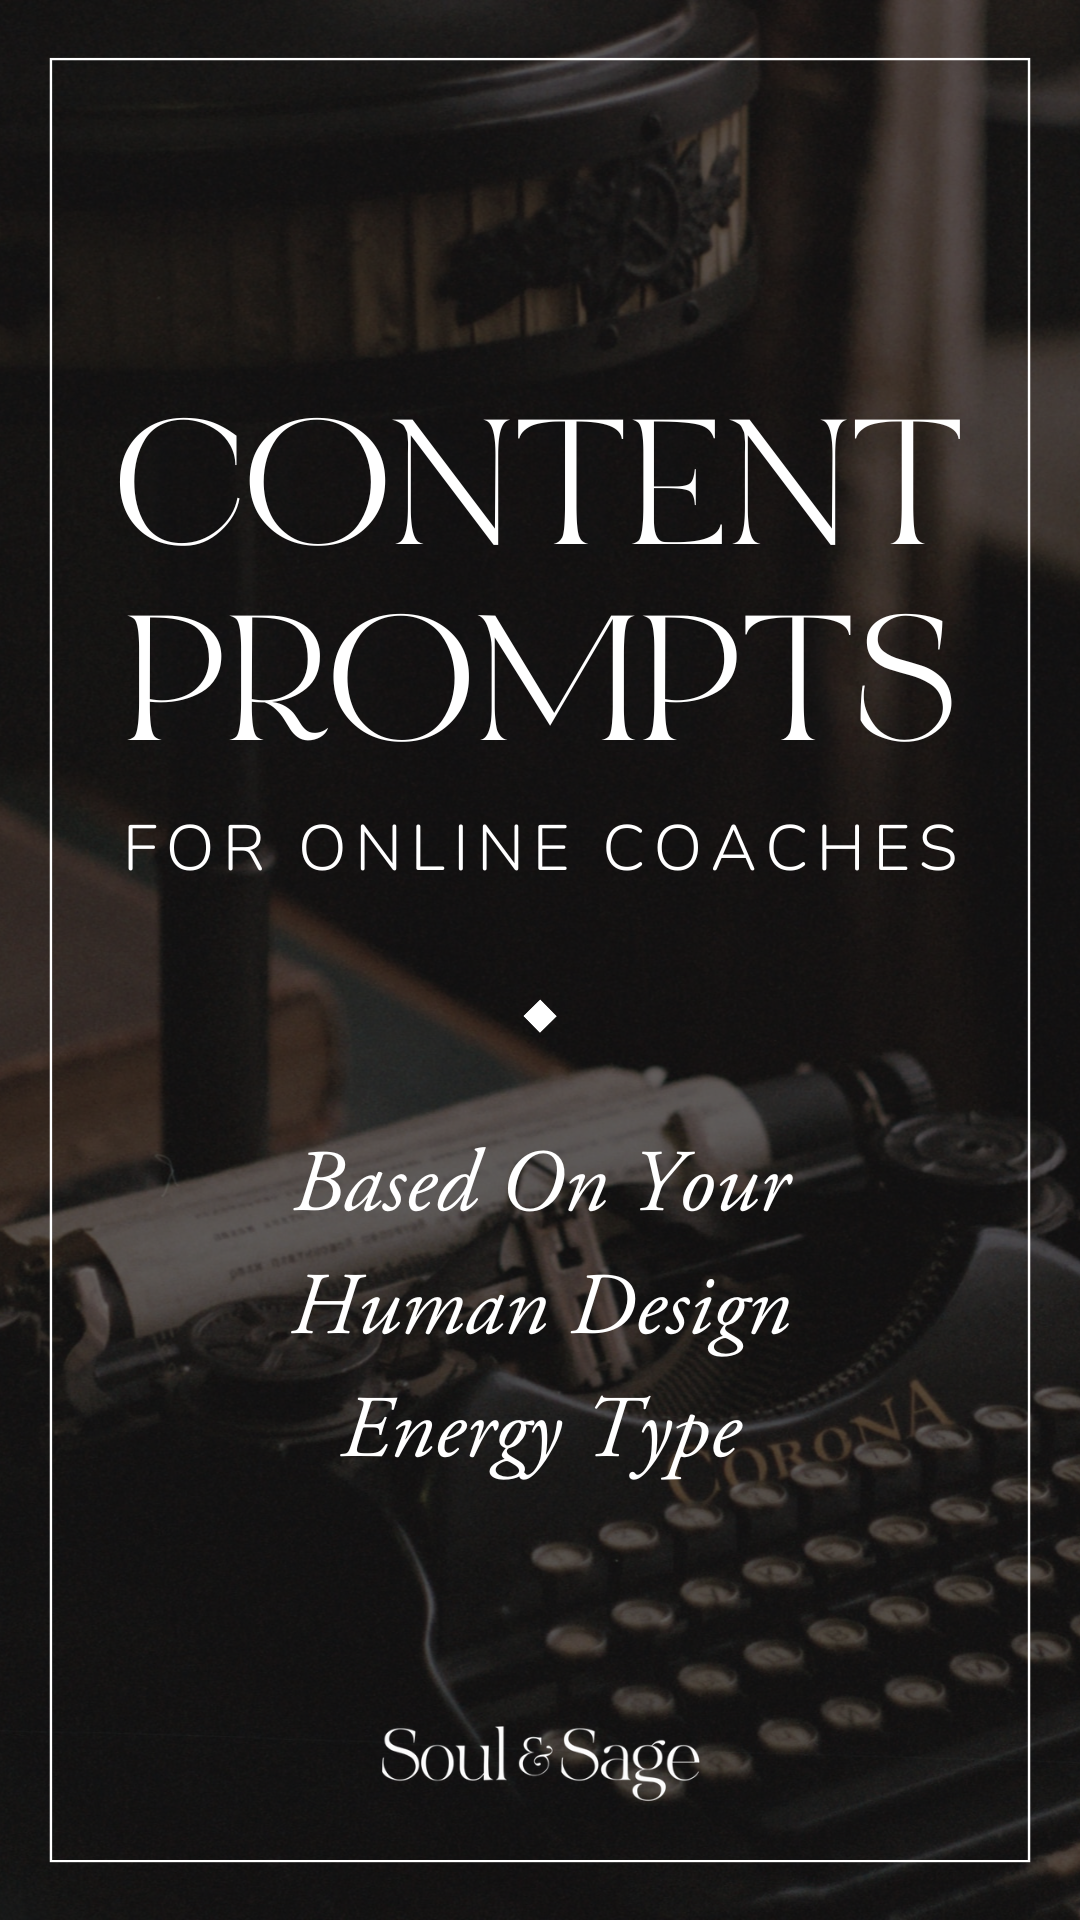 Content Prompts for Coaches based on your Human Design Energy Type